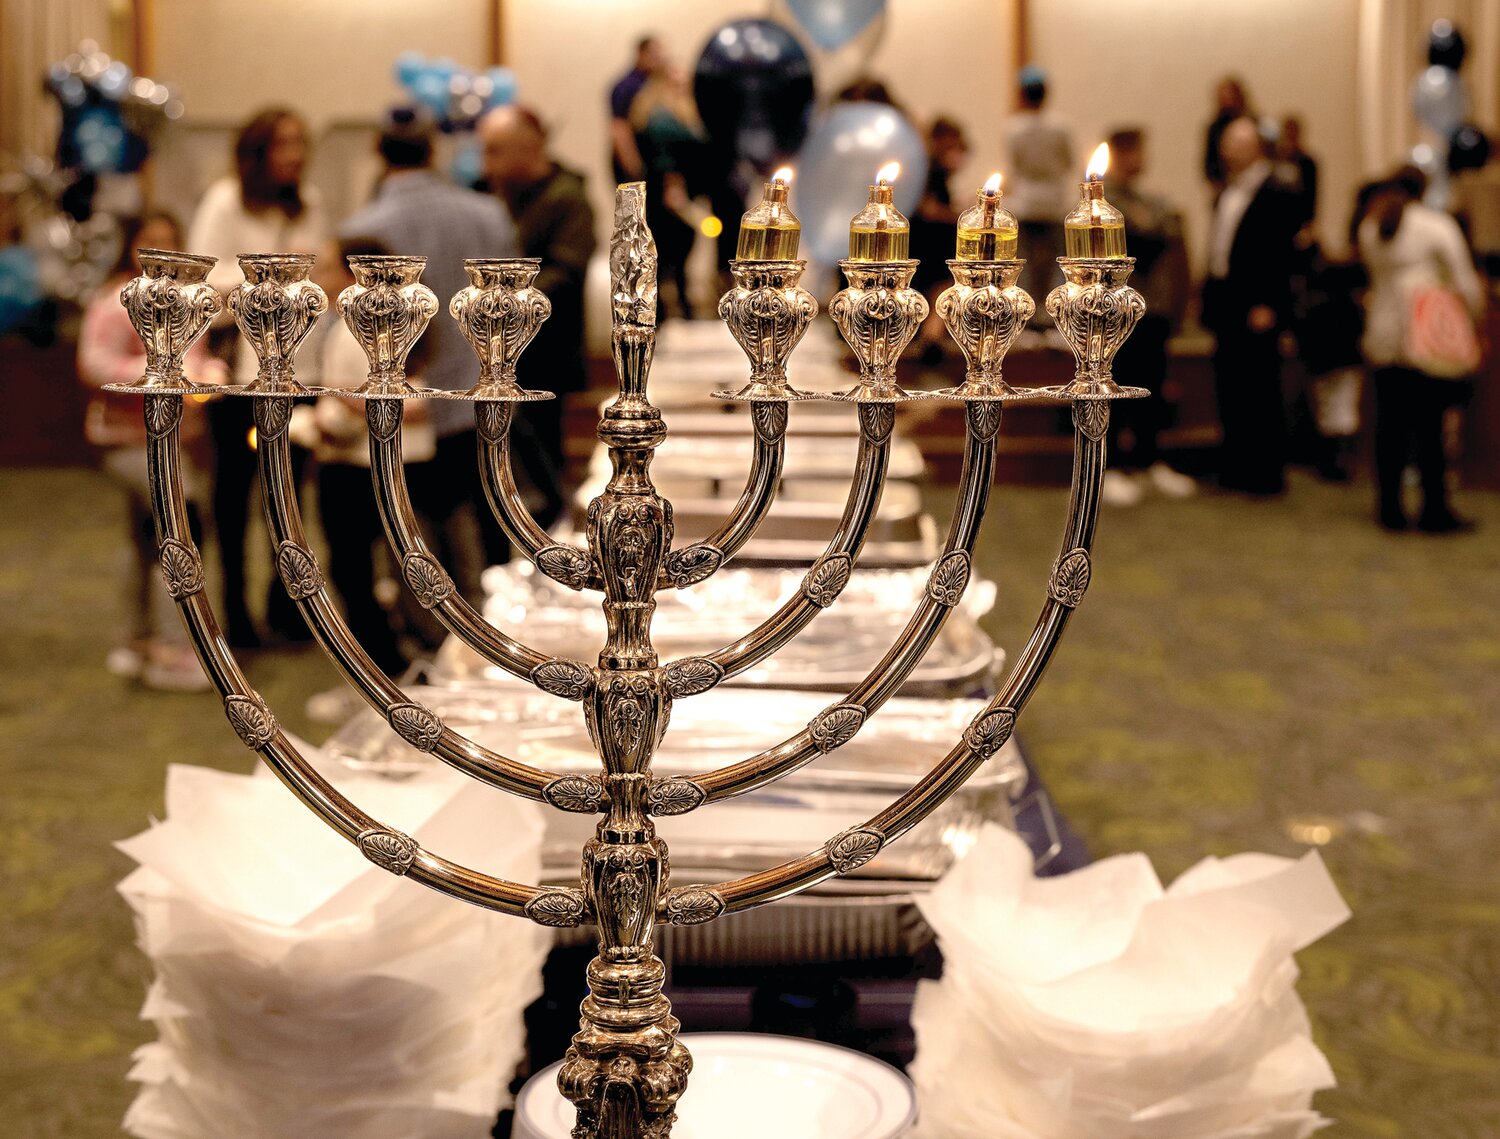 A symbol of light, the menorah represents Jewish pride and devotion to heritage.